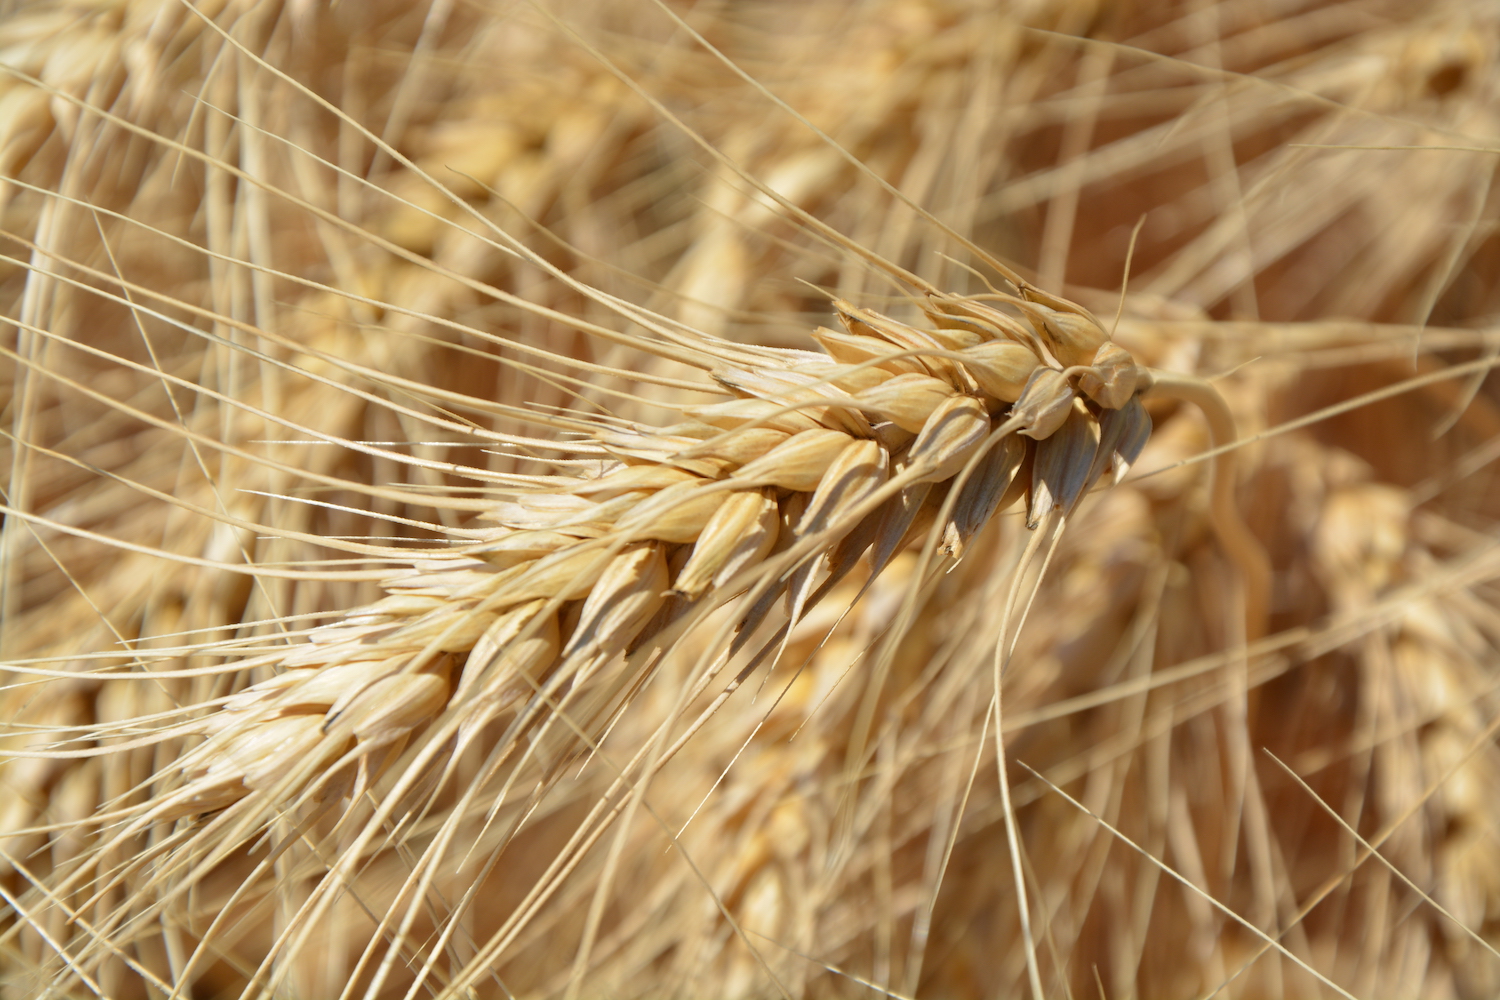 How was Wheat Domesticated? – Yale Scientific Magazine